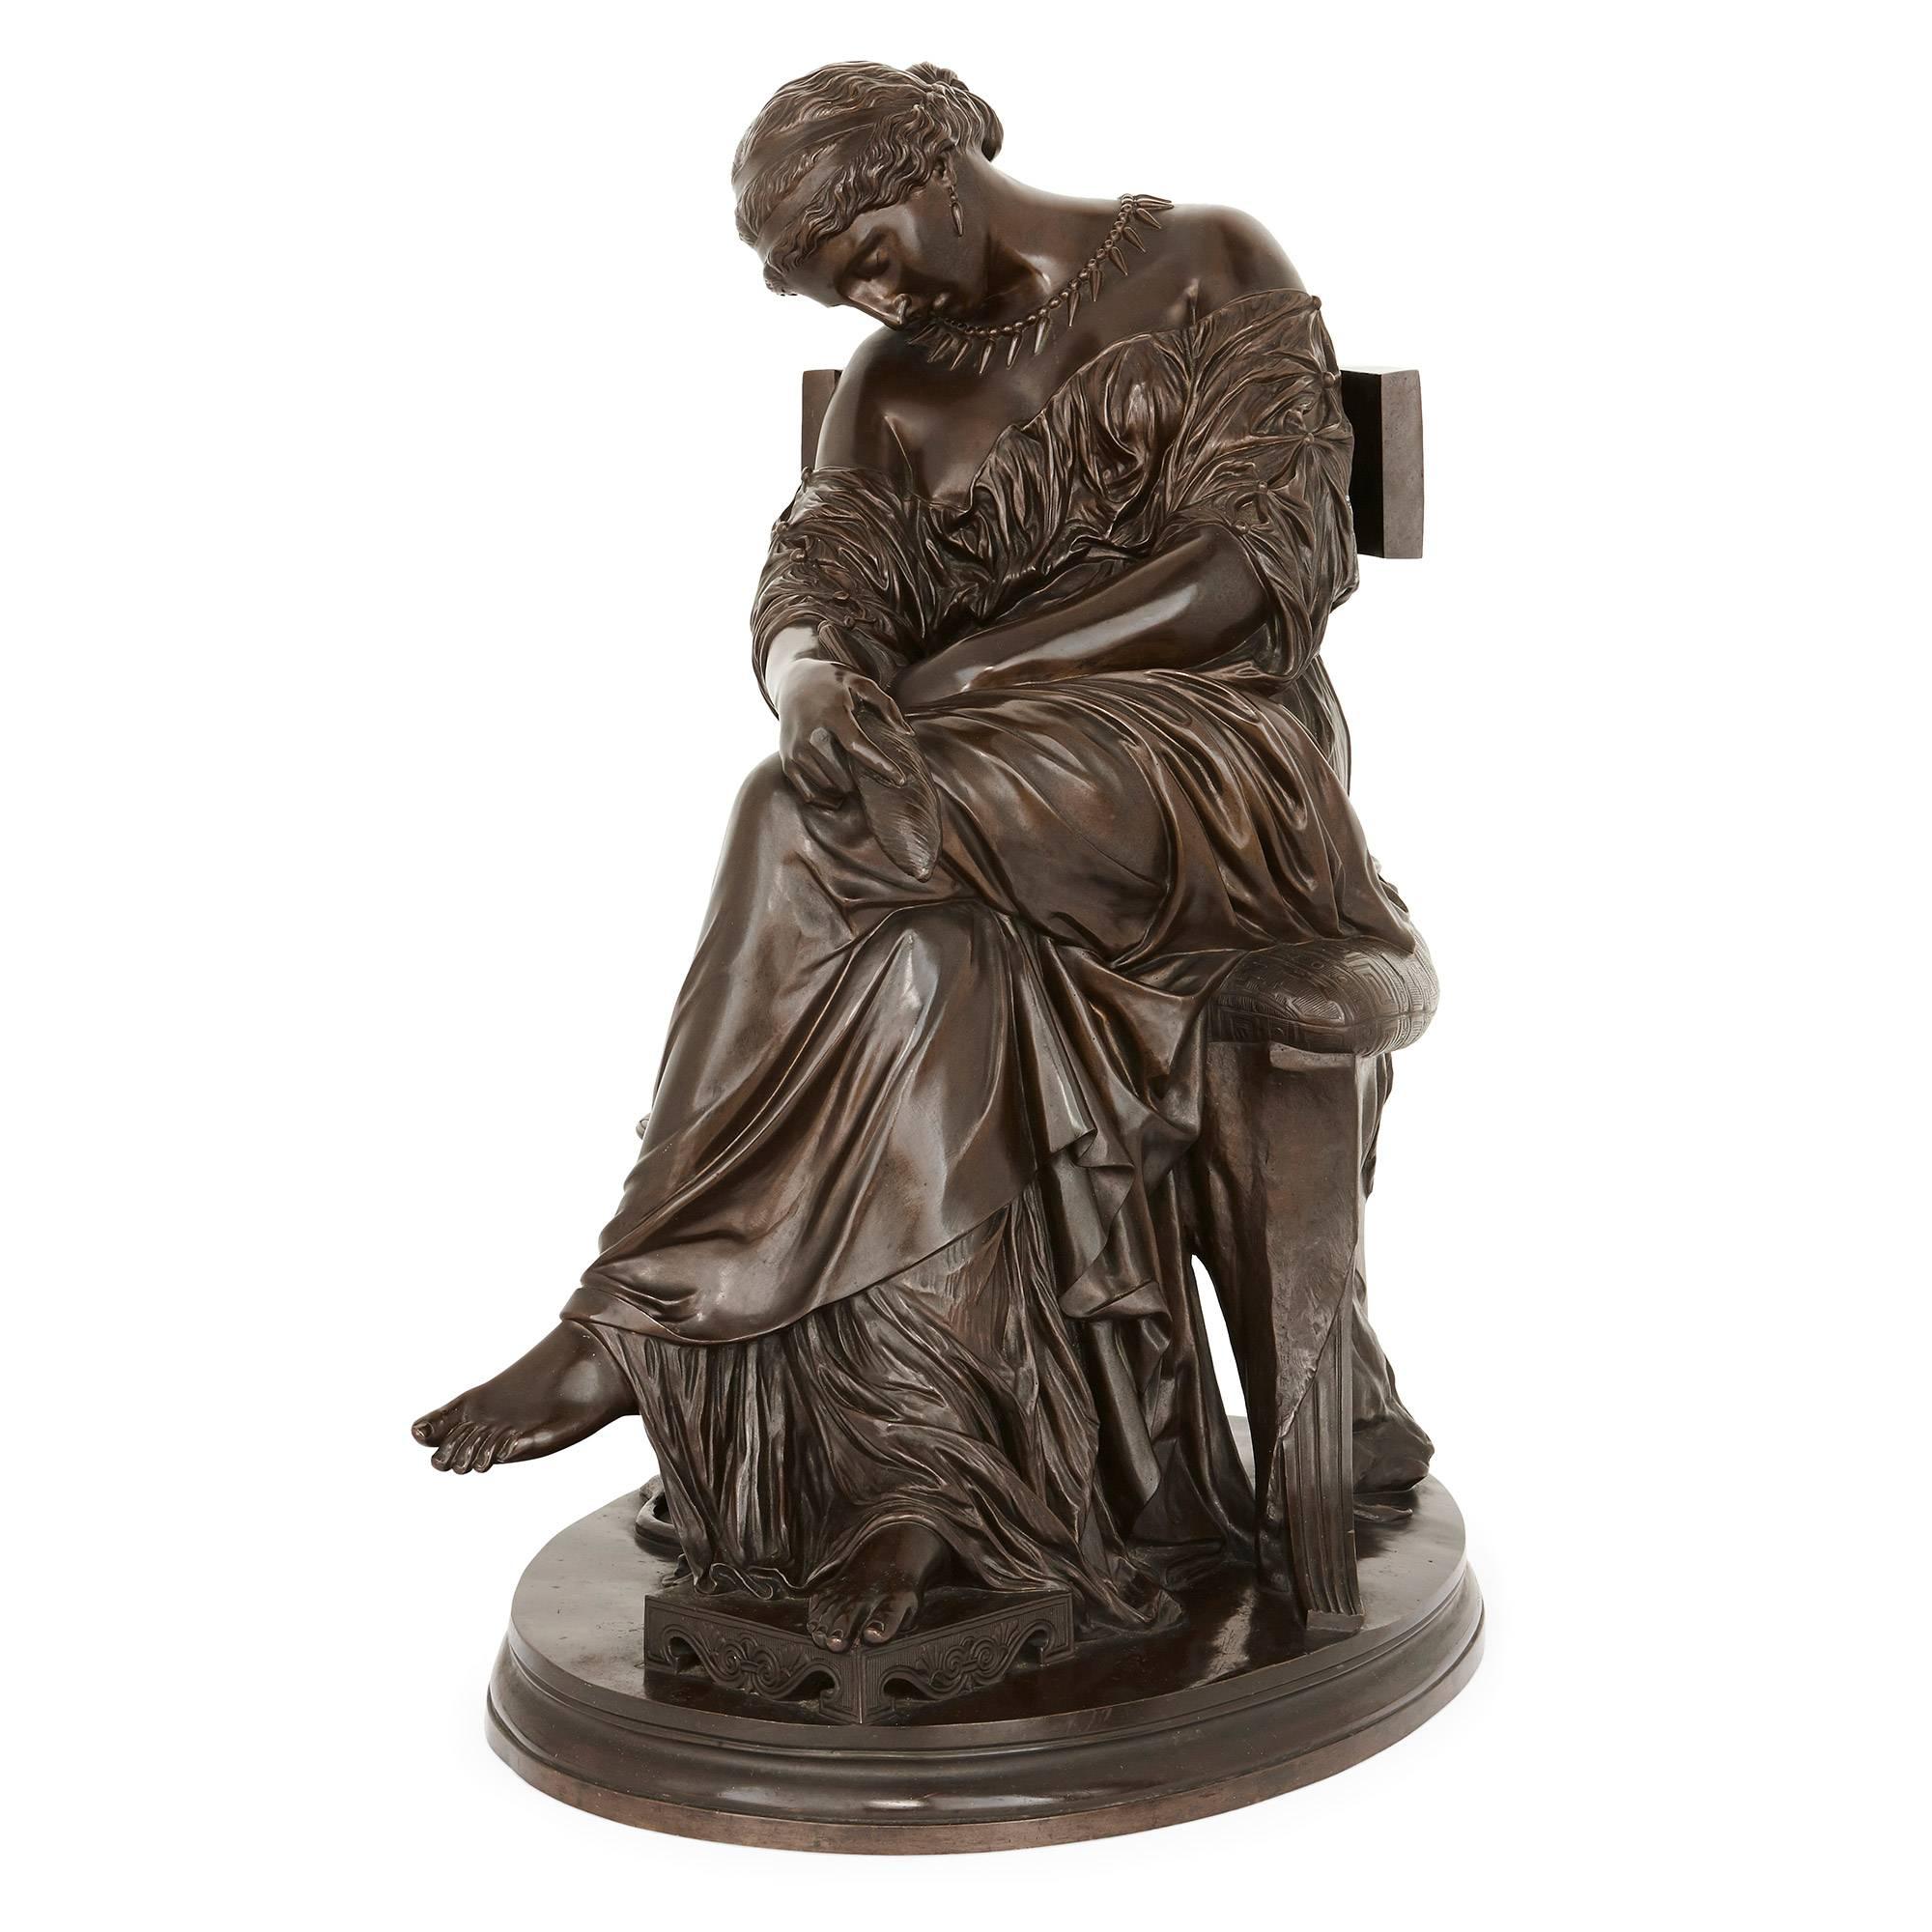 This large patinated bronze antique sculpture depicts the Classical figure Penelope, the wife of Odysseus (Roman name Ulysses) who appears in Homer's Odyssey. The sculpture is set on an oval base and Penelope is shown sleeping on a chair with a